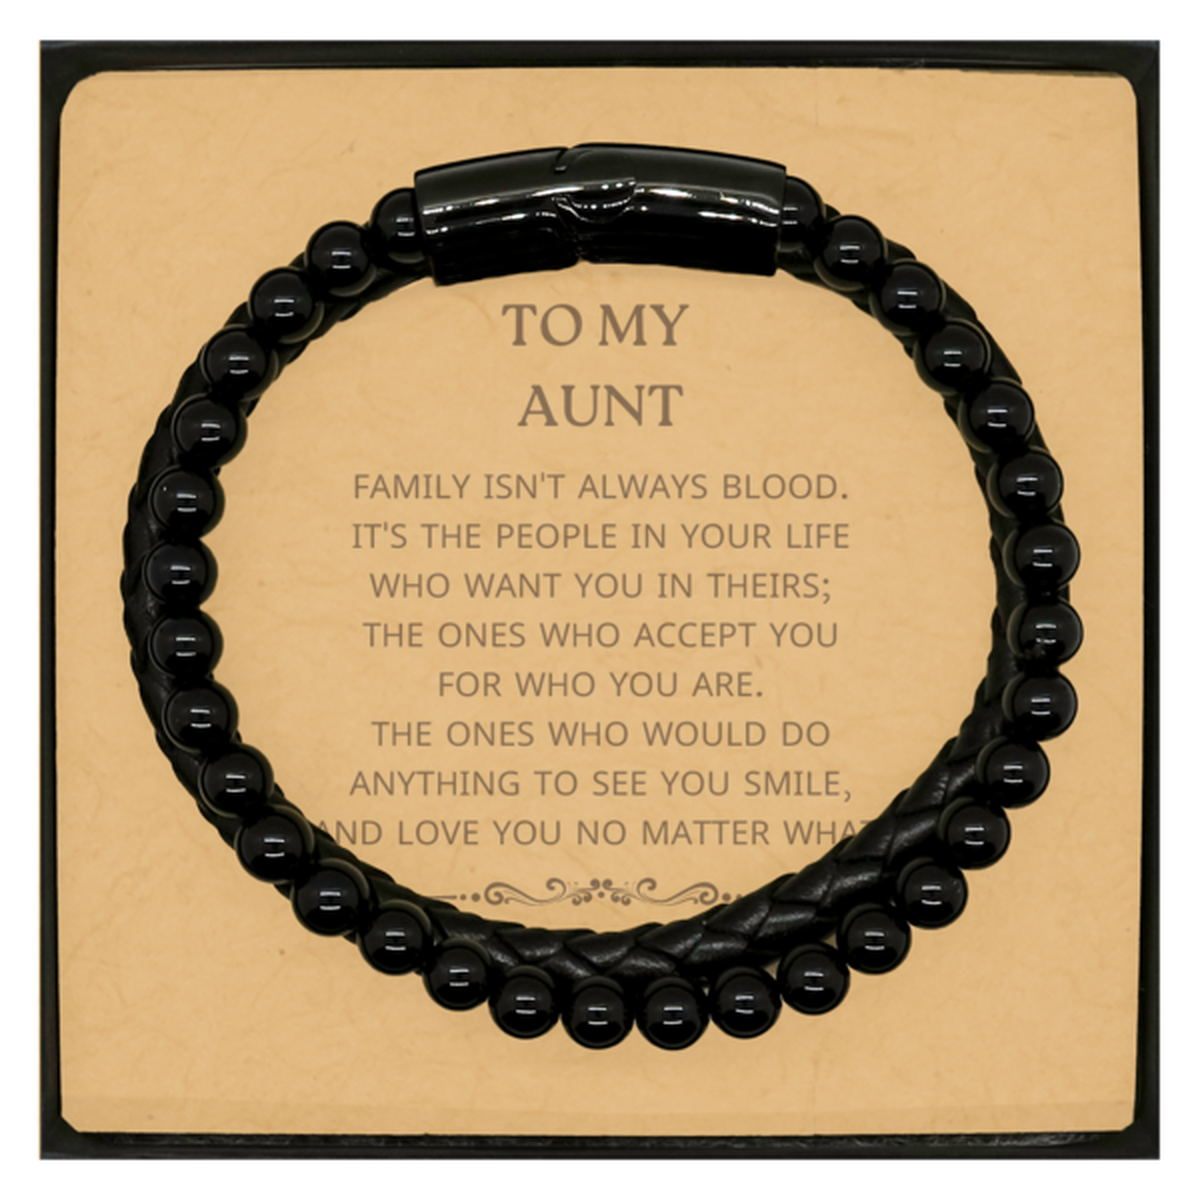 To My Aunt Gifts, Family isn't always blood, Aunt Stone Leather Bracelets, Birthday Christmas Unique Present For Aunt